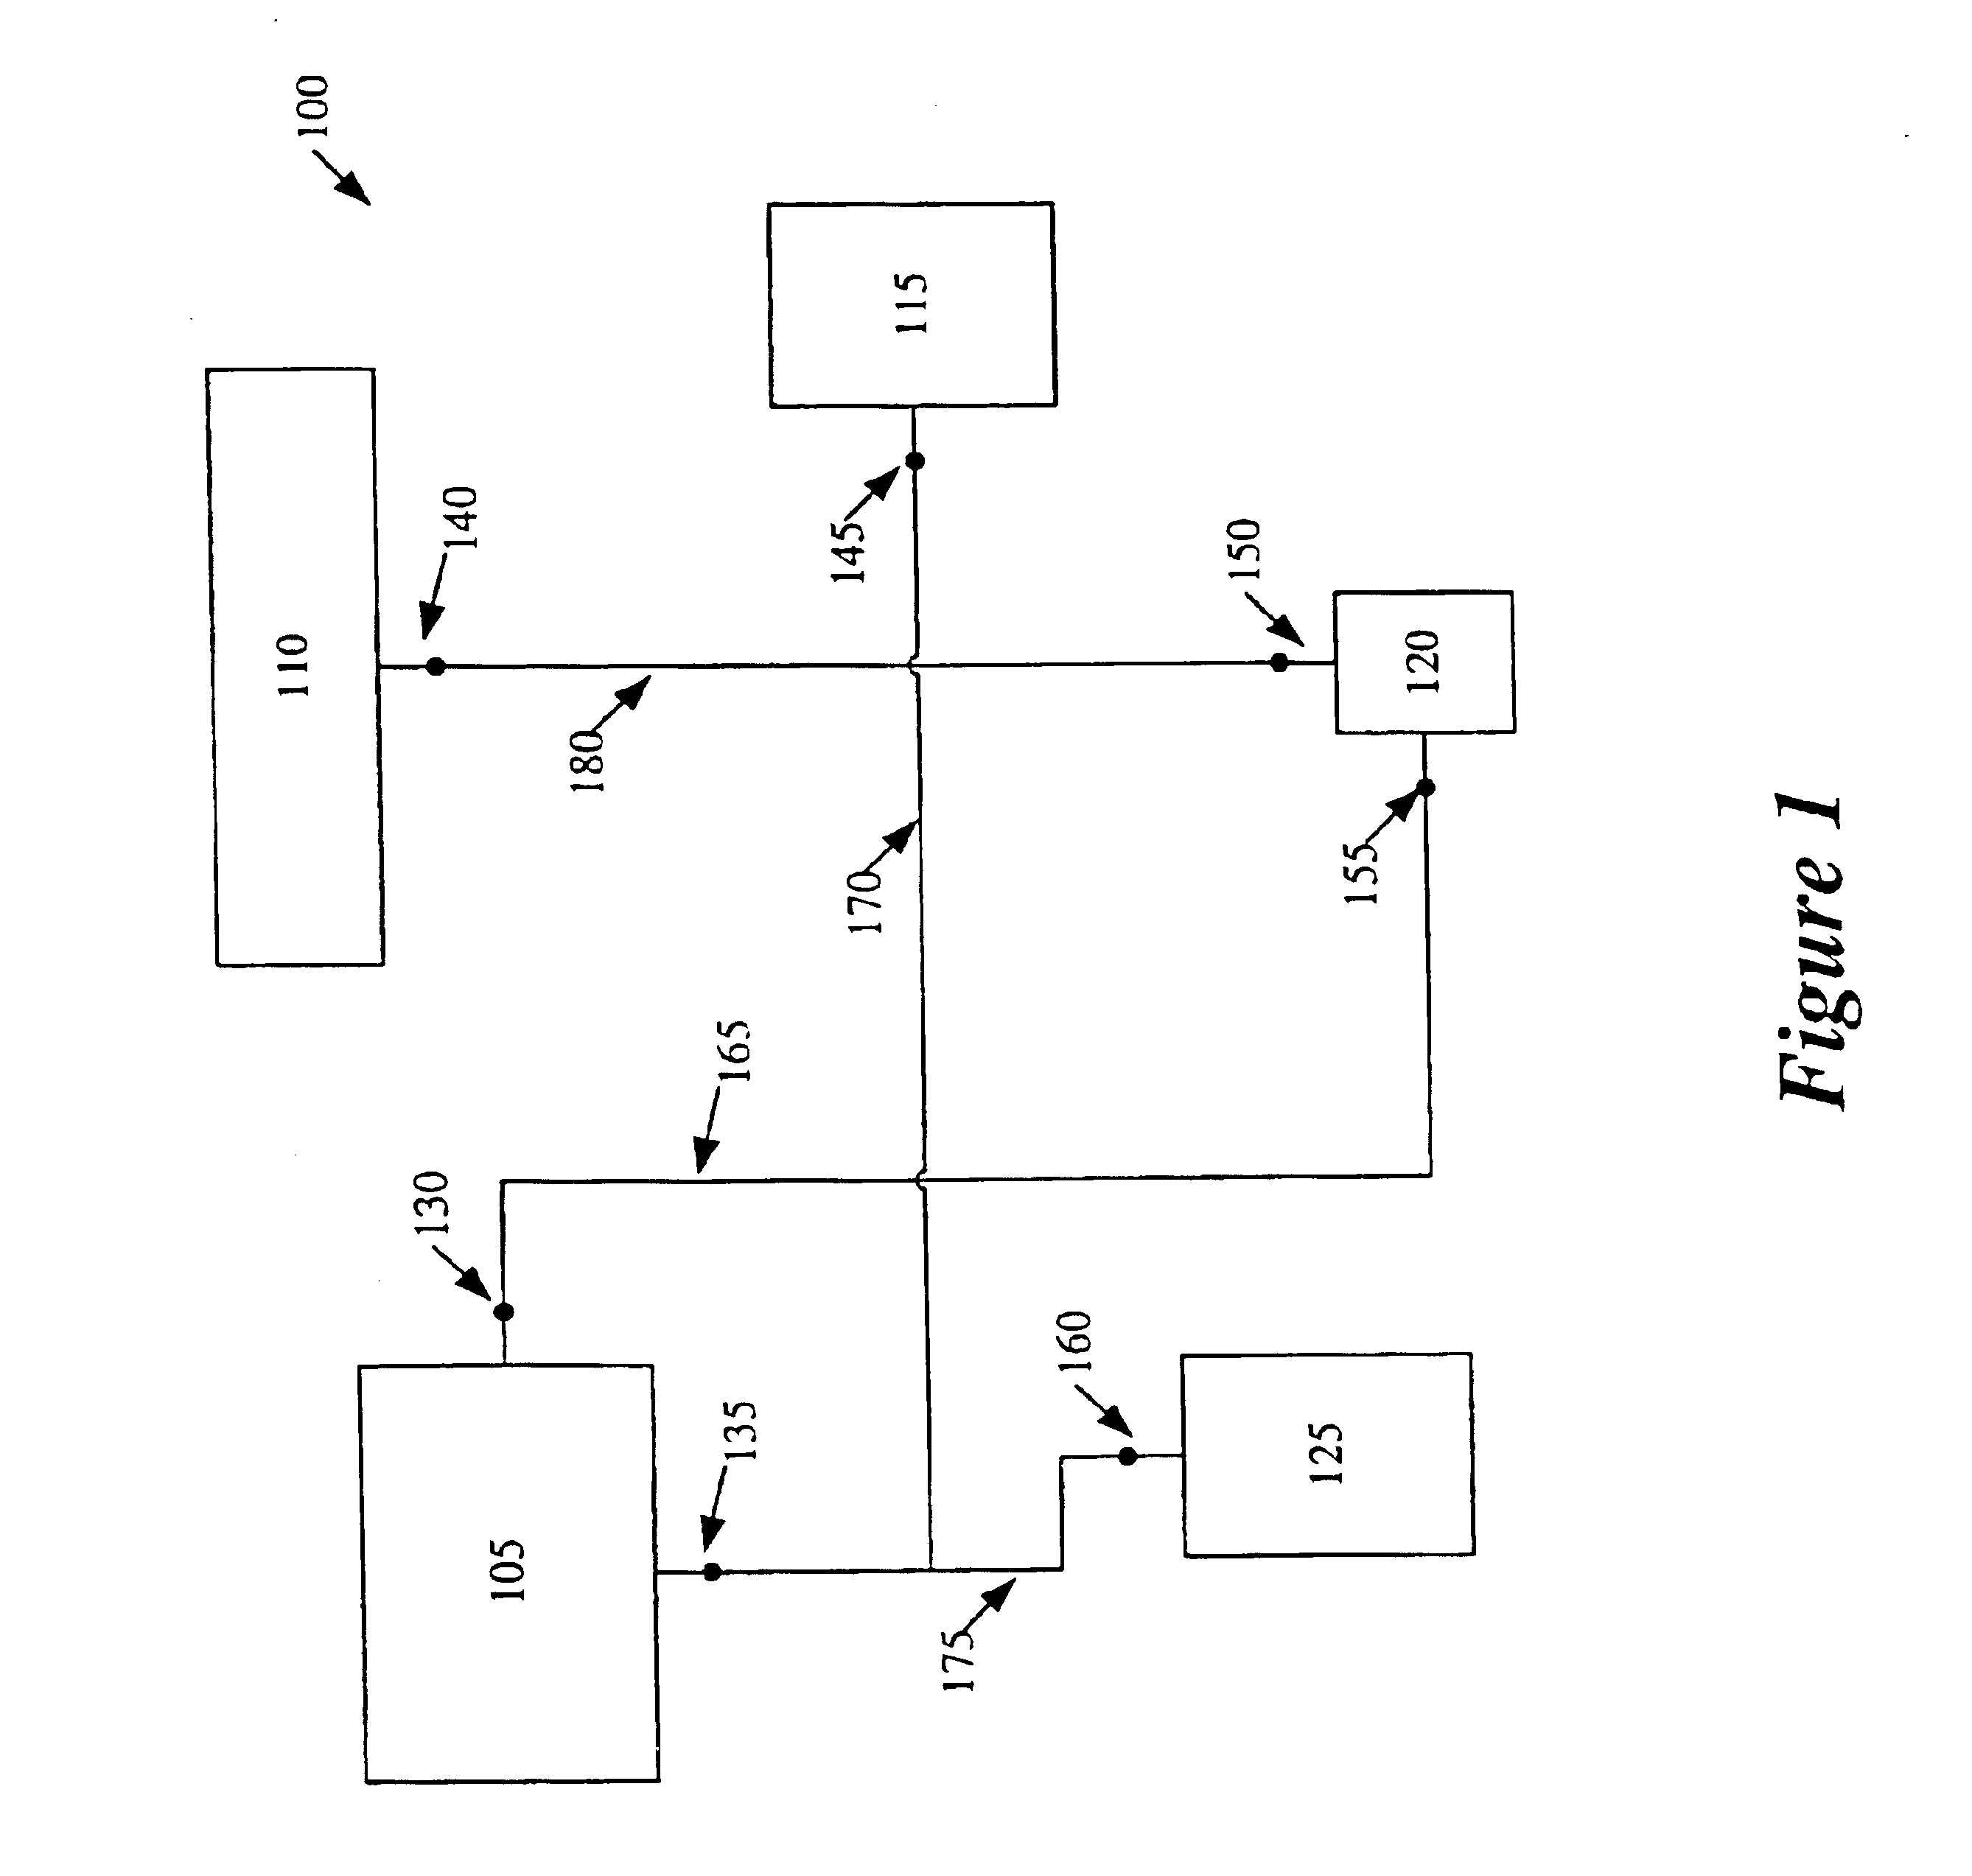 Method and apparatus for pre-computing routes